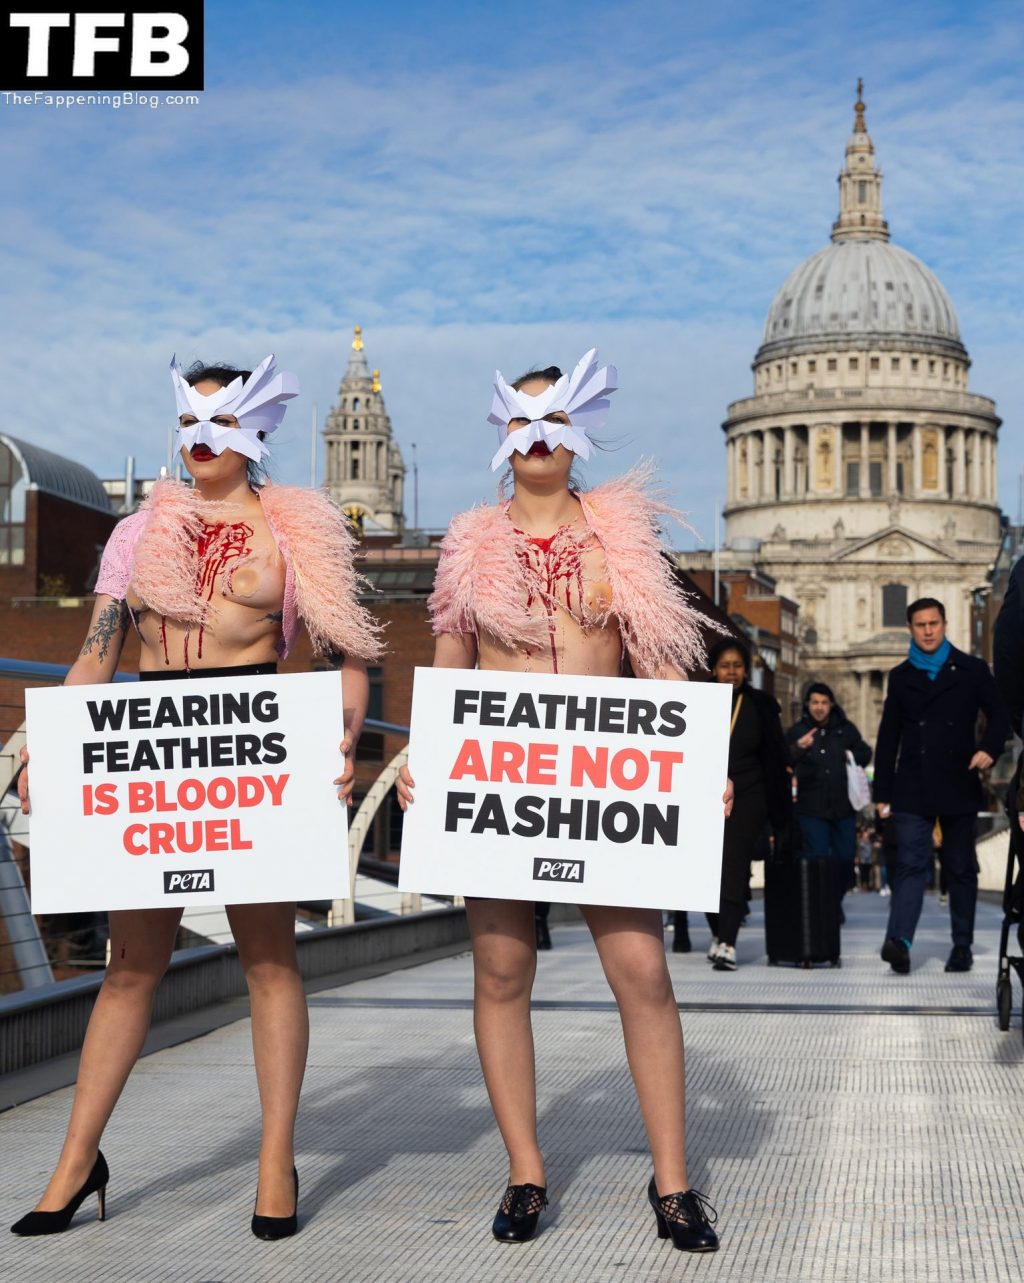 Topless Girls PETA The Fappening Blog 4 1024x1283 - PETA Topless Protest at Use of Feathers in the Fashion Industry (32 Photos)